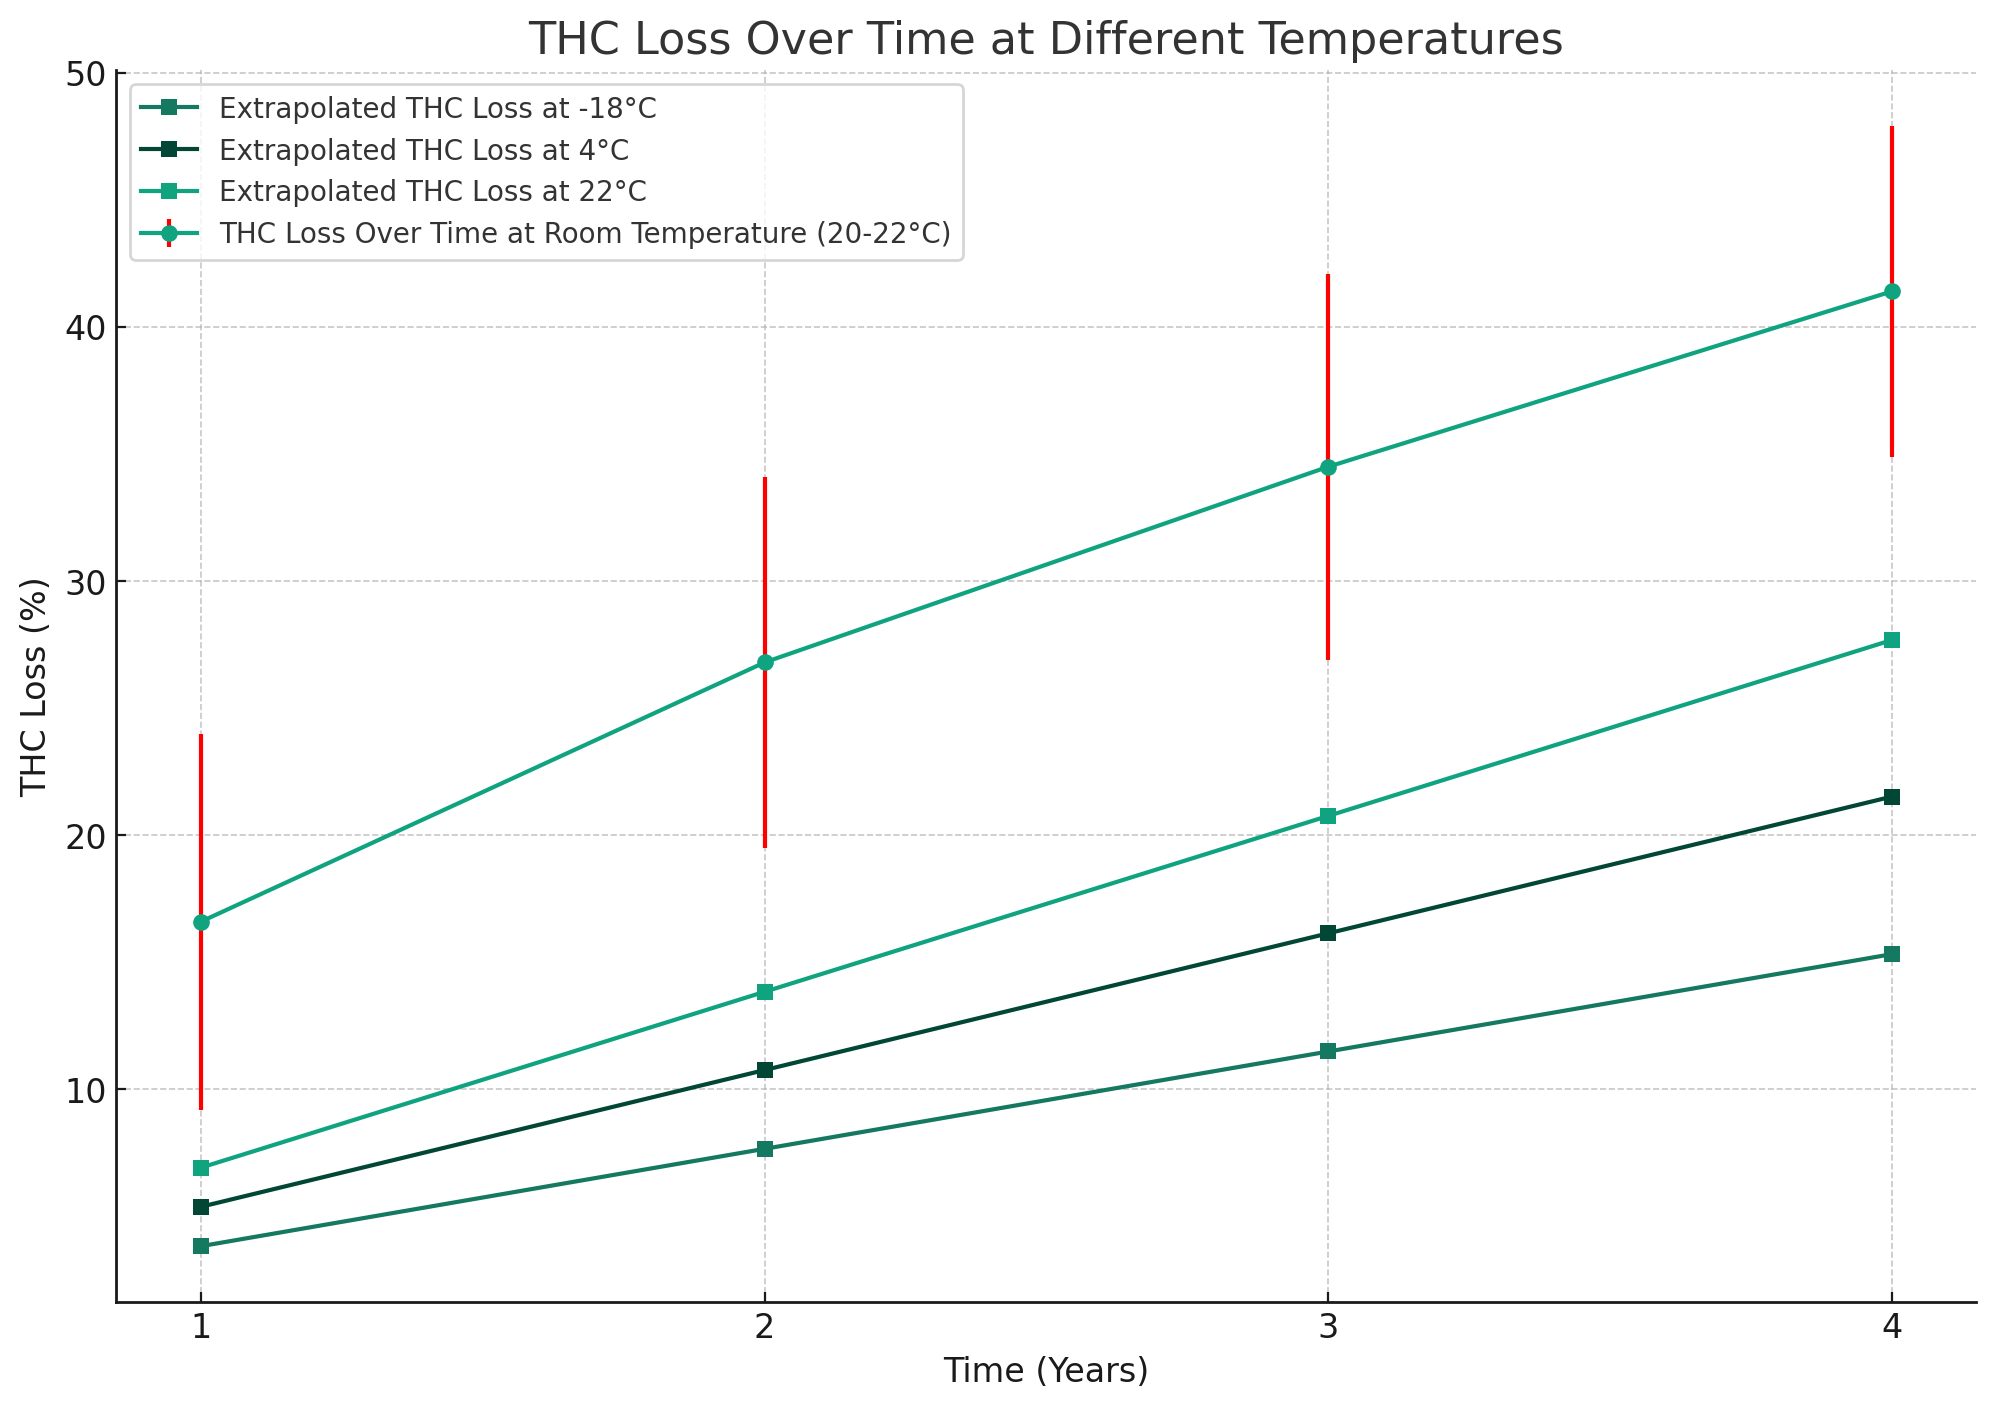 graph of THC loss over time